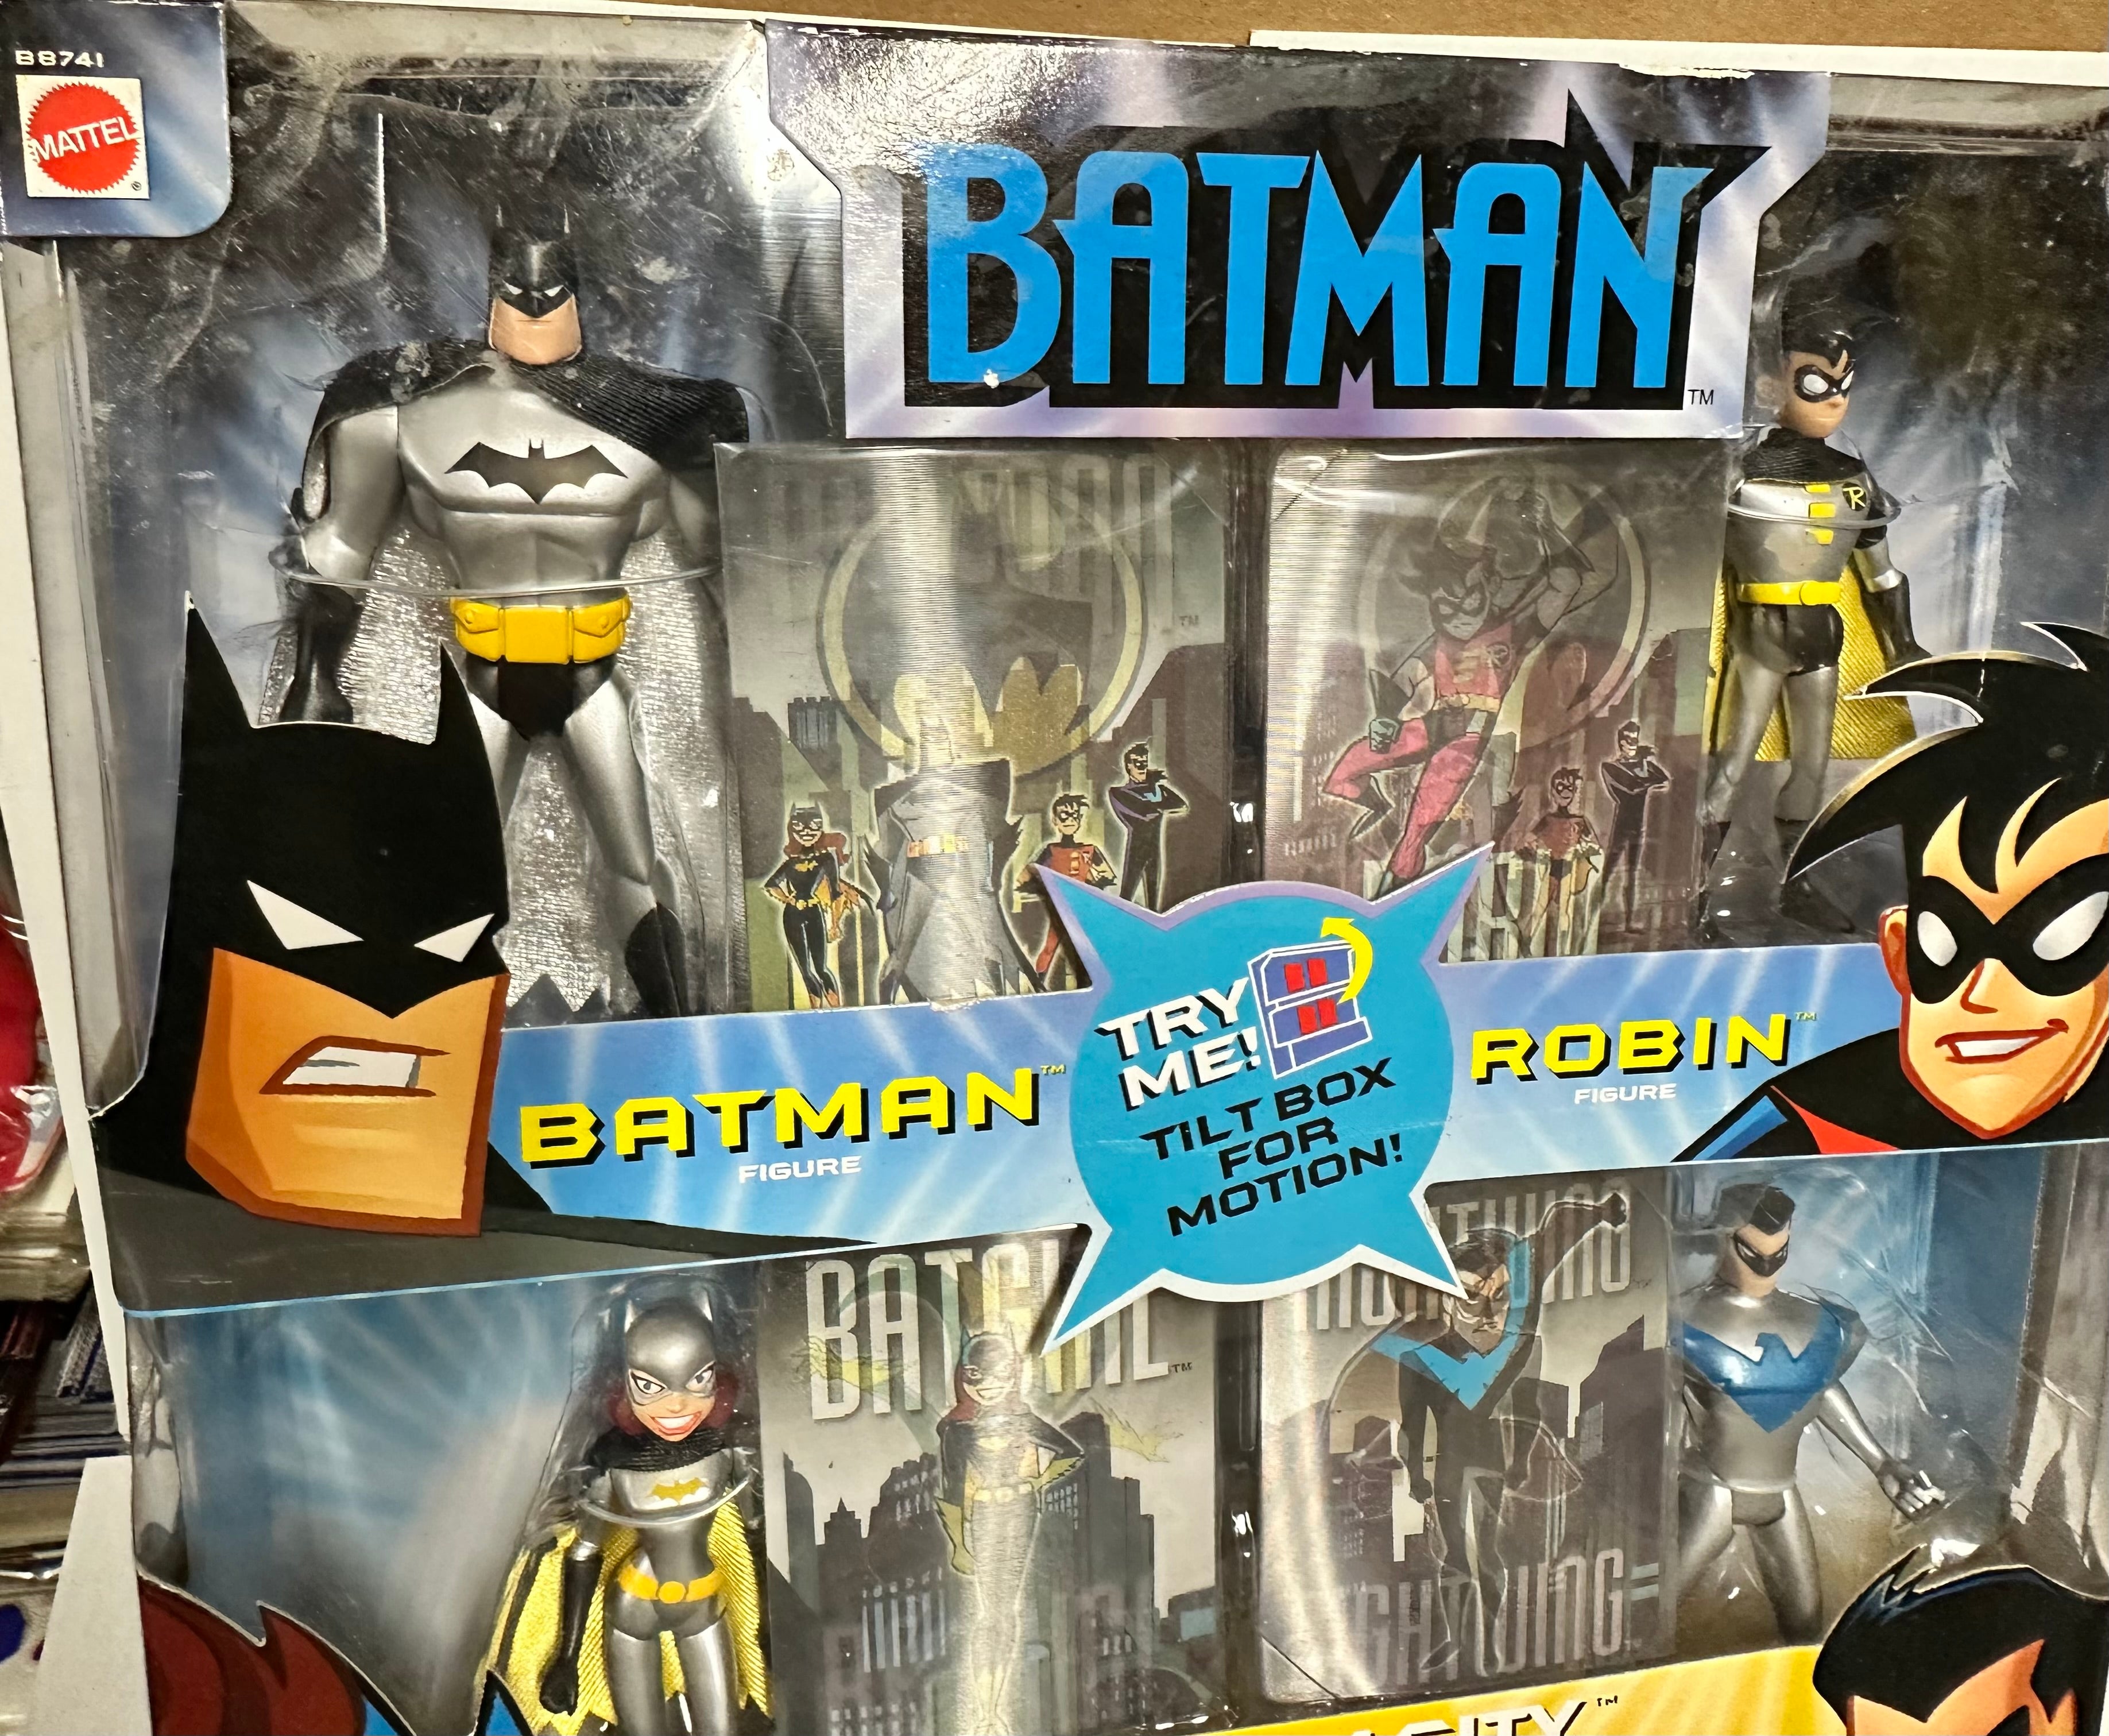 Batman and Robin Mattel, four figures plus motion, cards, factory sealed toy display